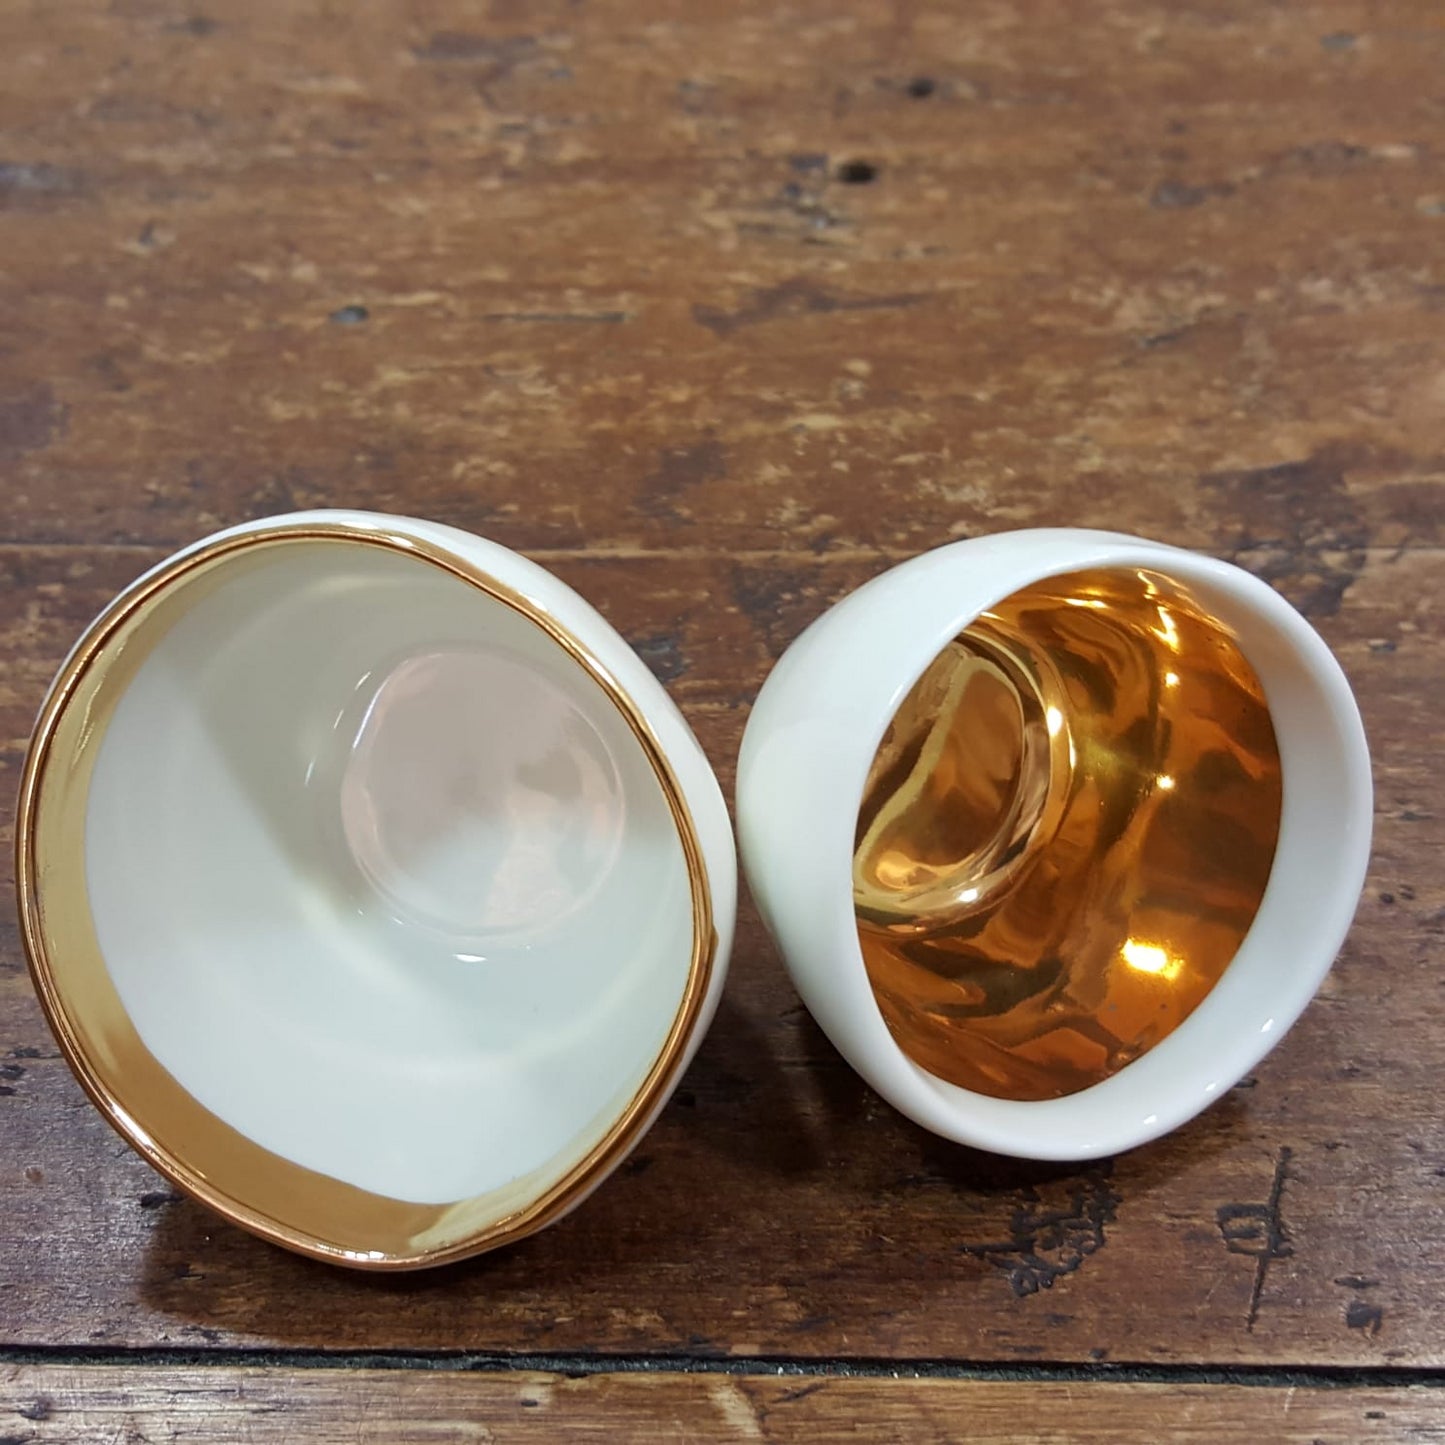 Porcelain and pure gold cups